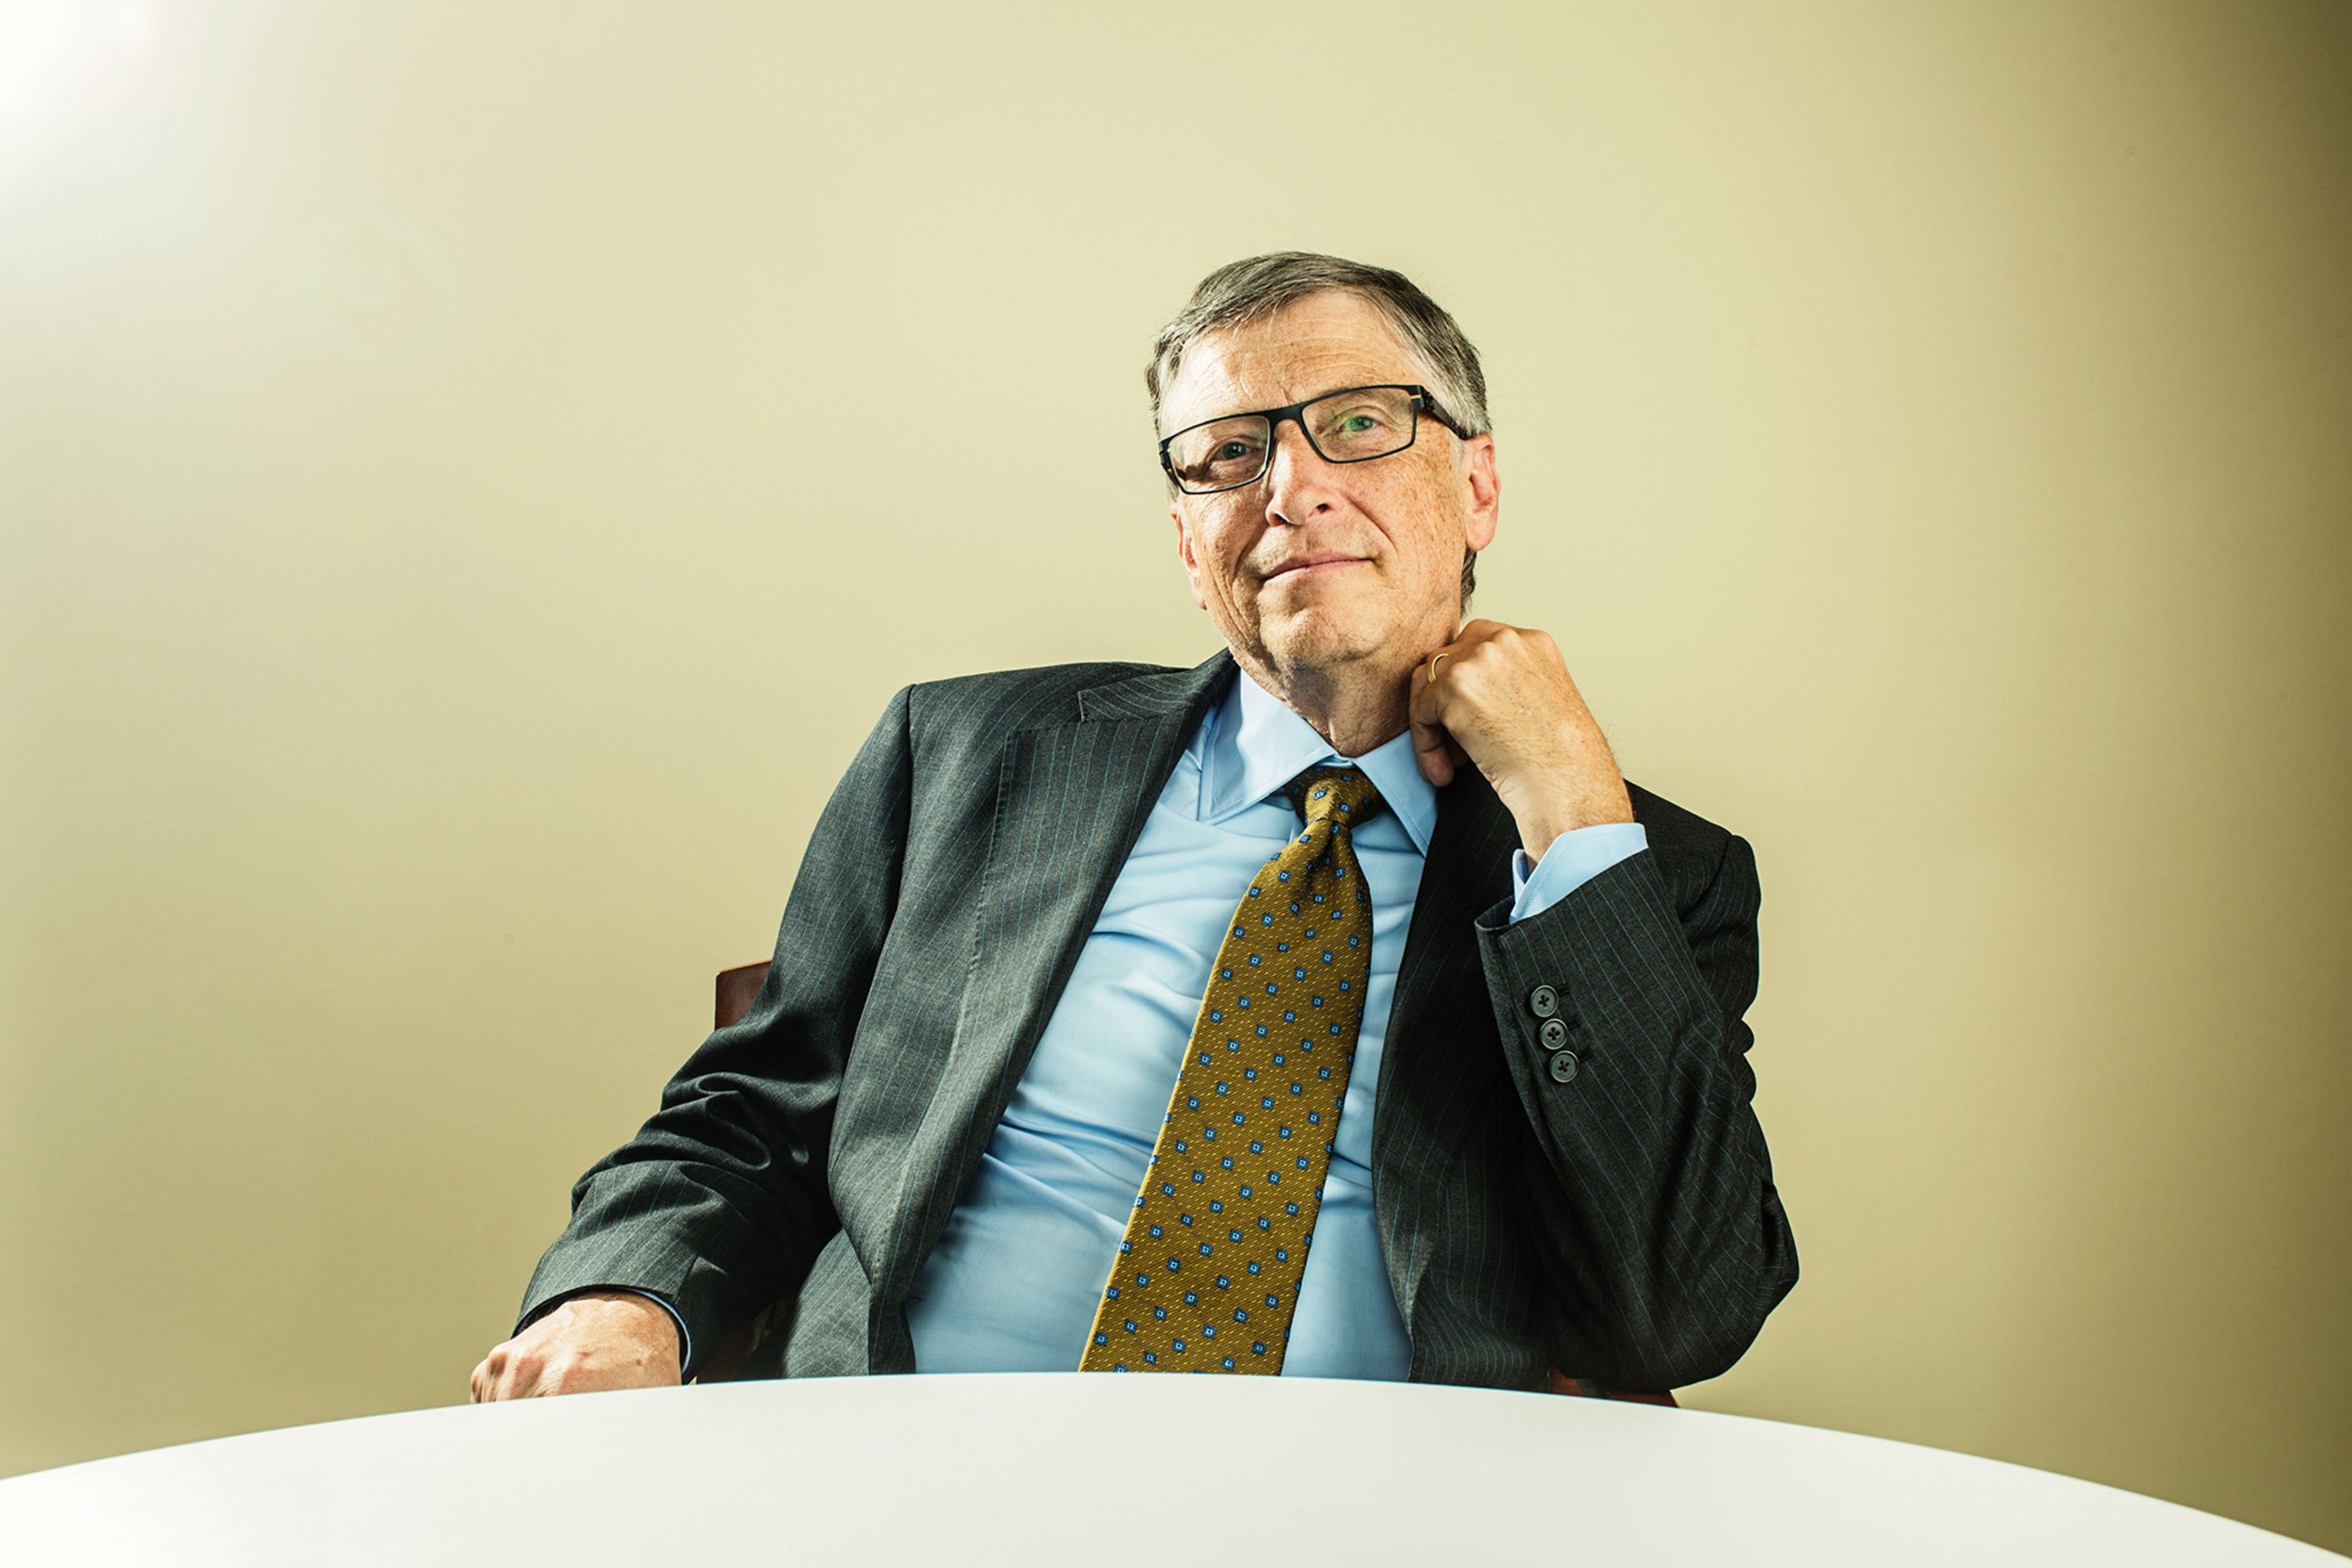 Bill Gates poses for a portrait in Washington, DC, in 2014.